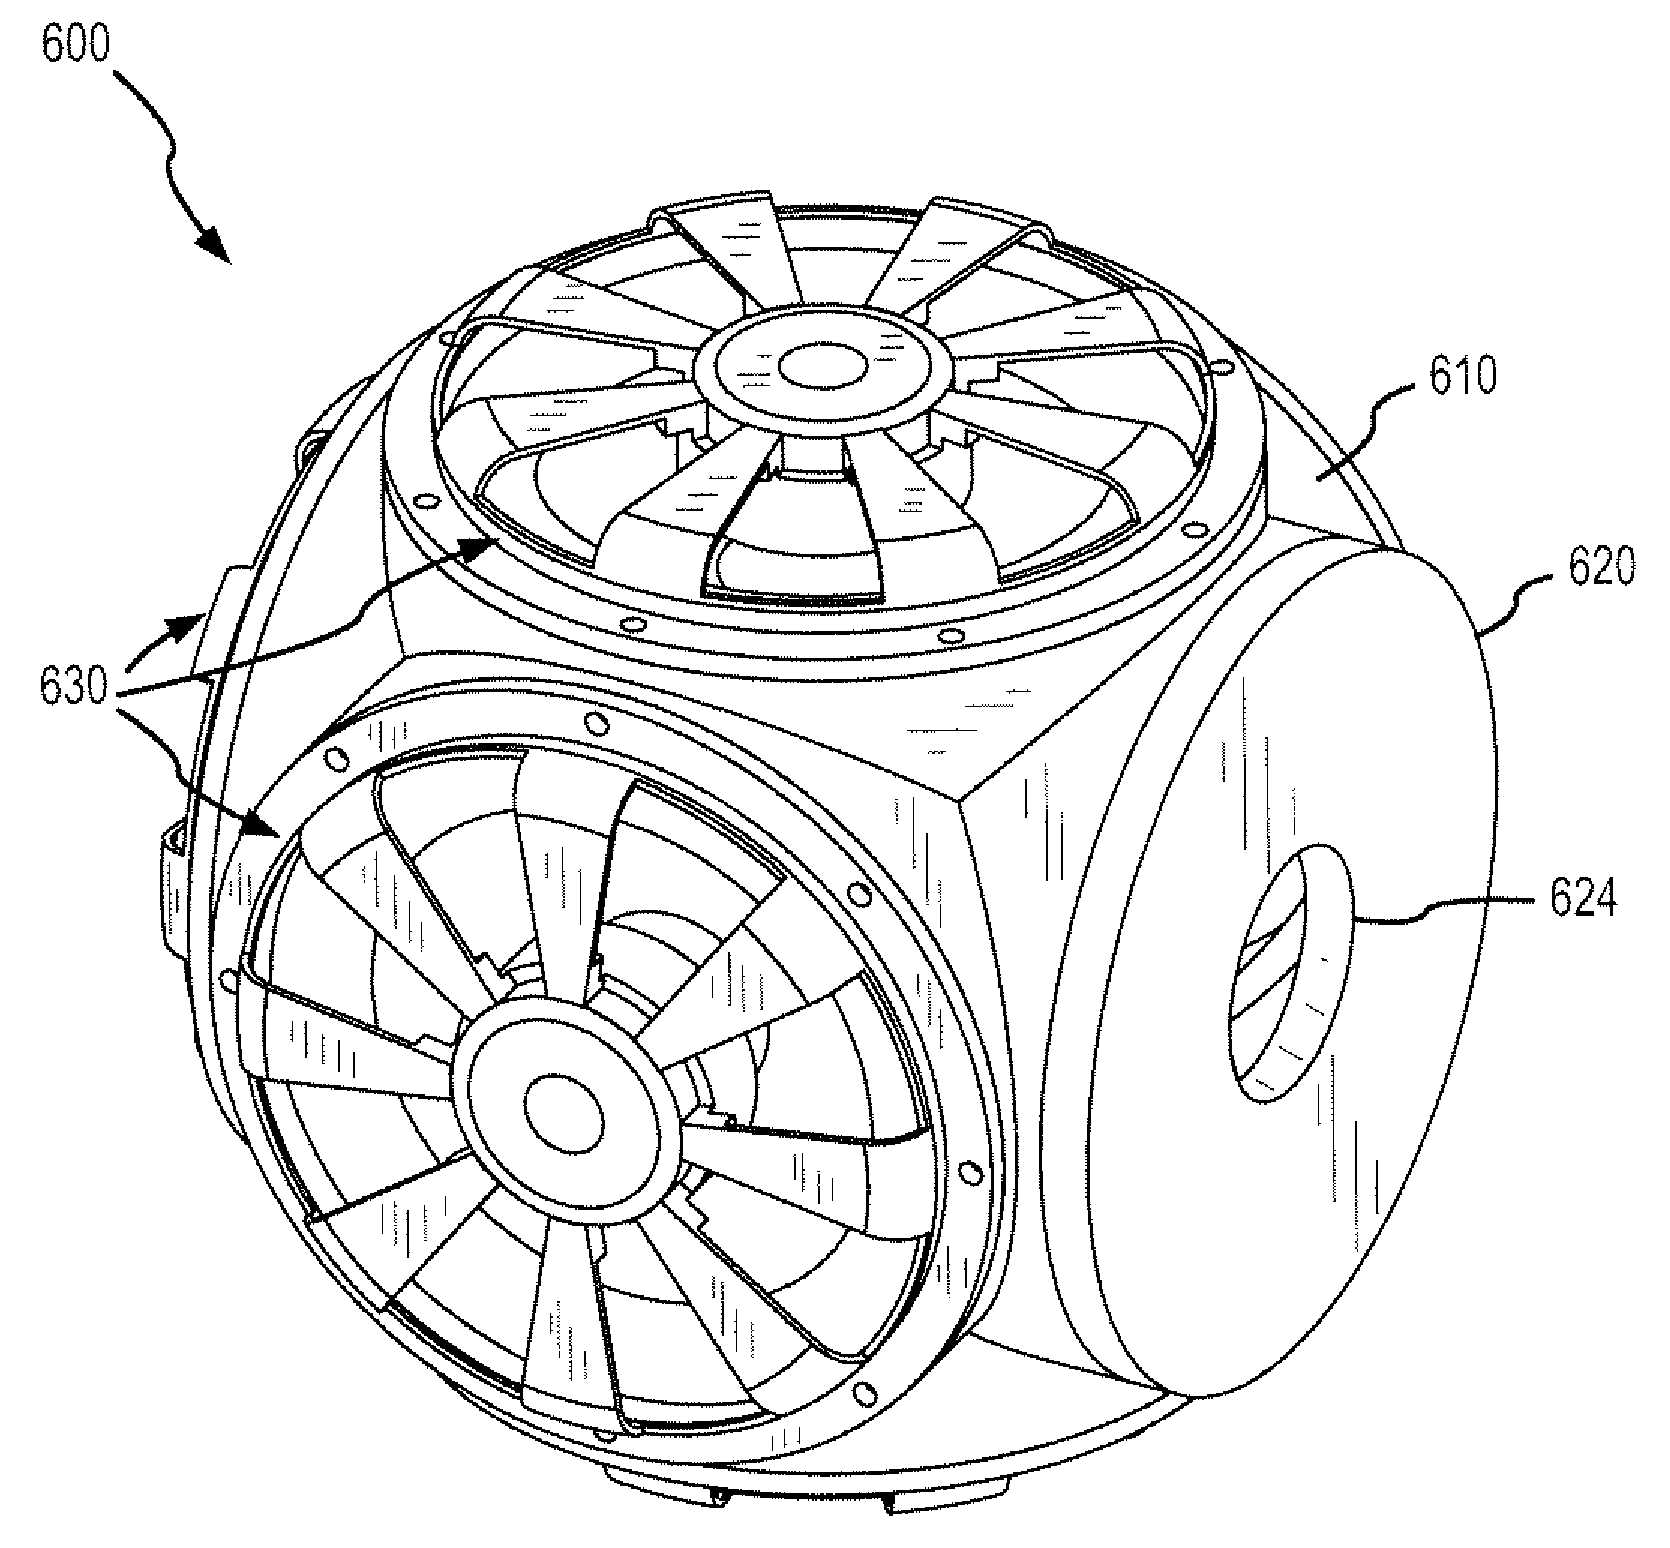 Device for producing high speed air projectiles or pulses